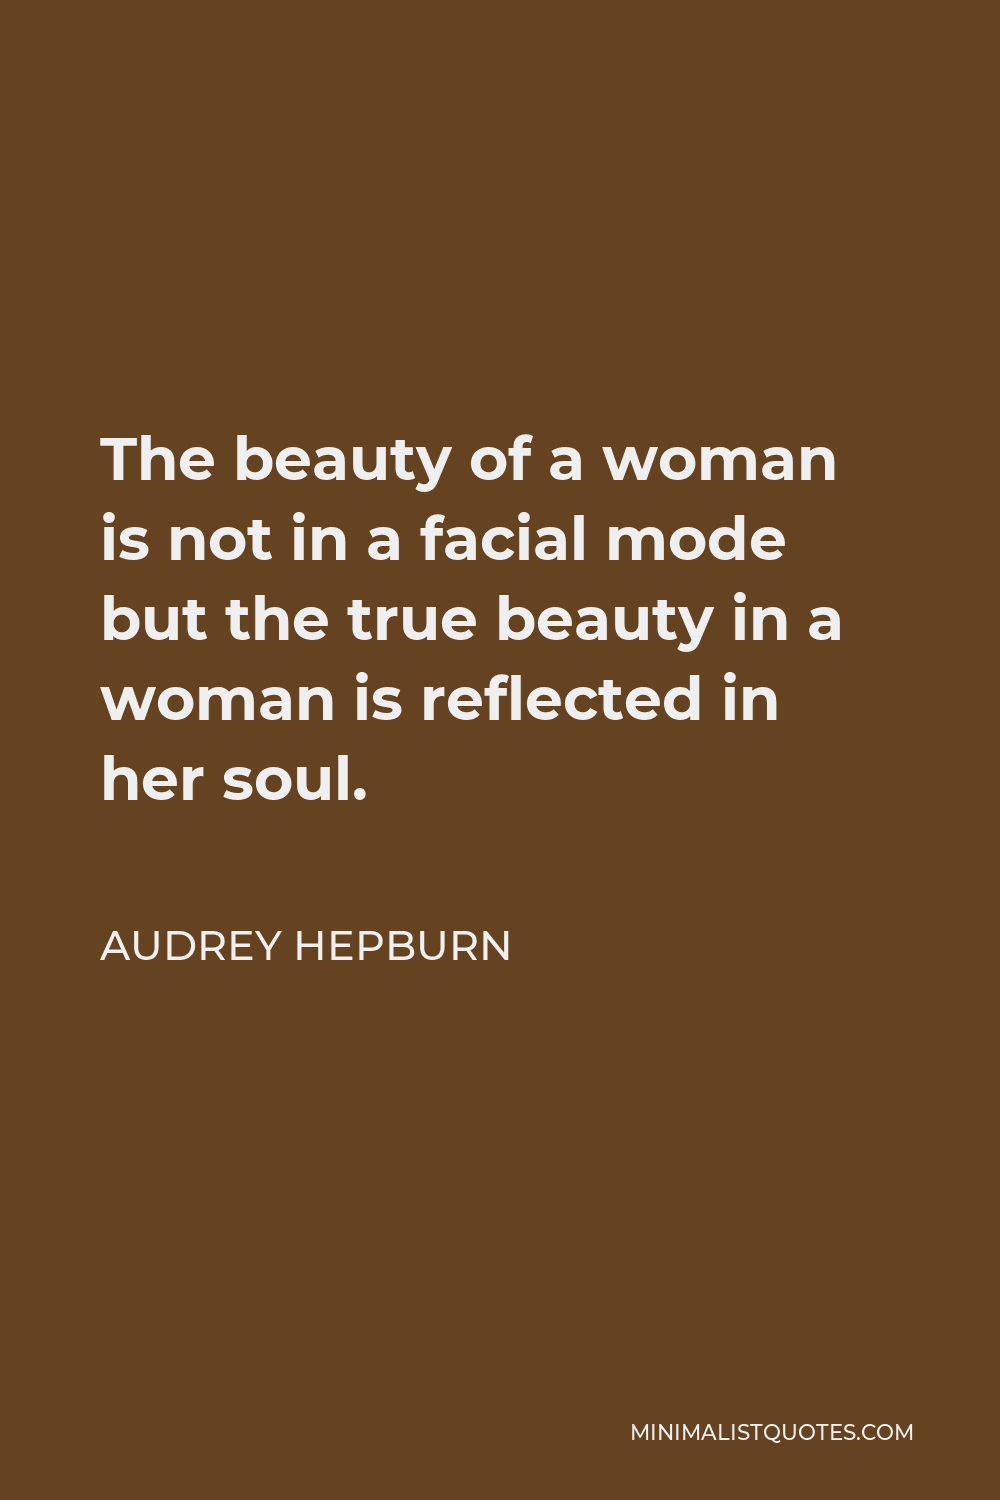 Audrey Hepburn Quote: The beauty of a woman is not in a facial mode but ...